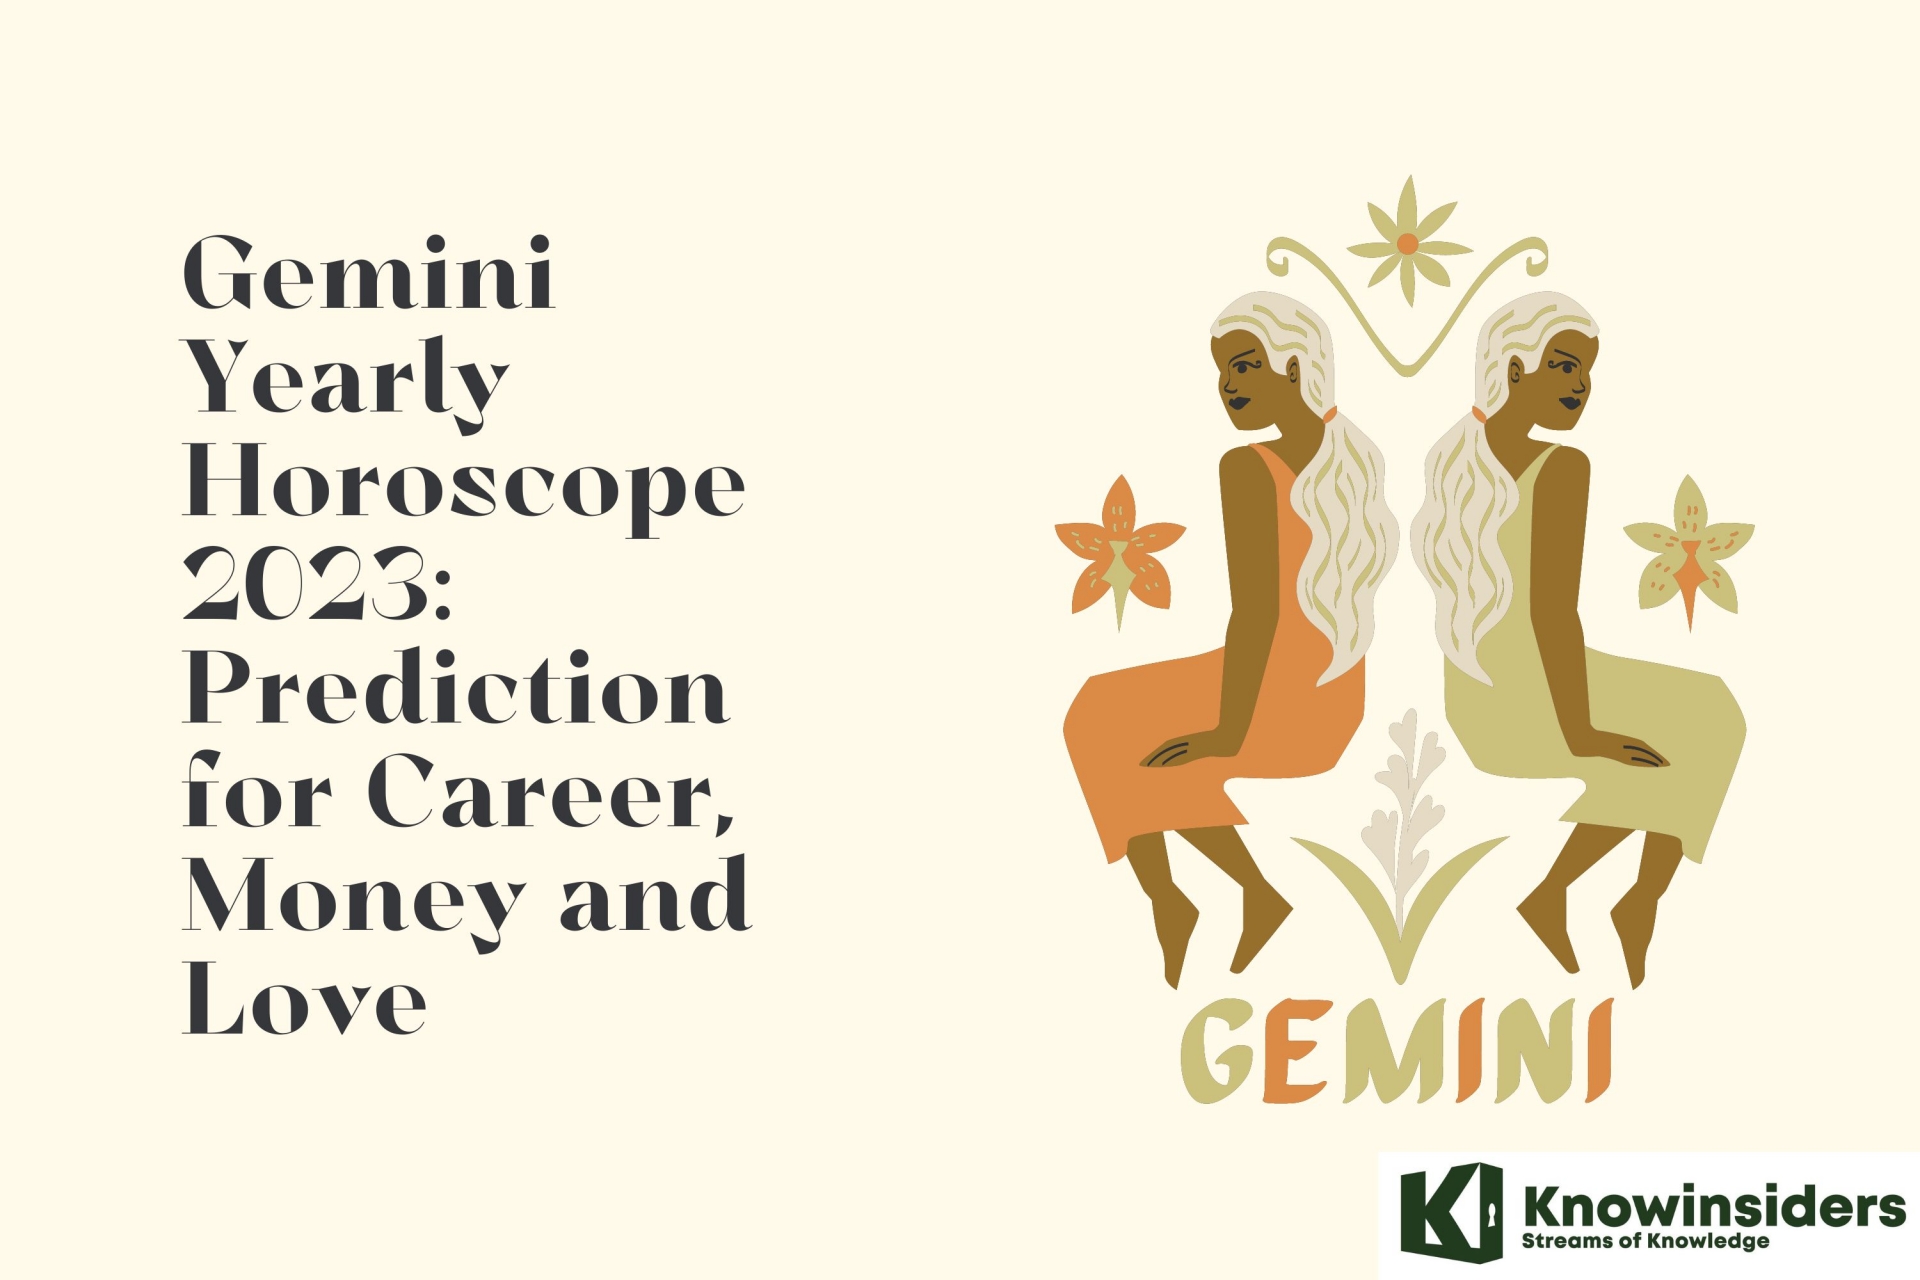 Gemini Yearly Horoscope 2023: Prediction for Career, Money and Love